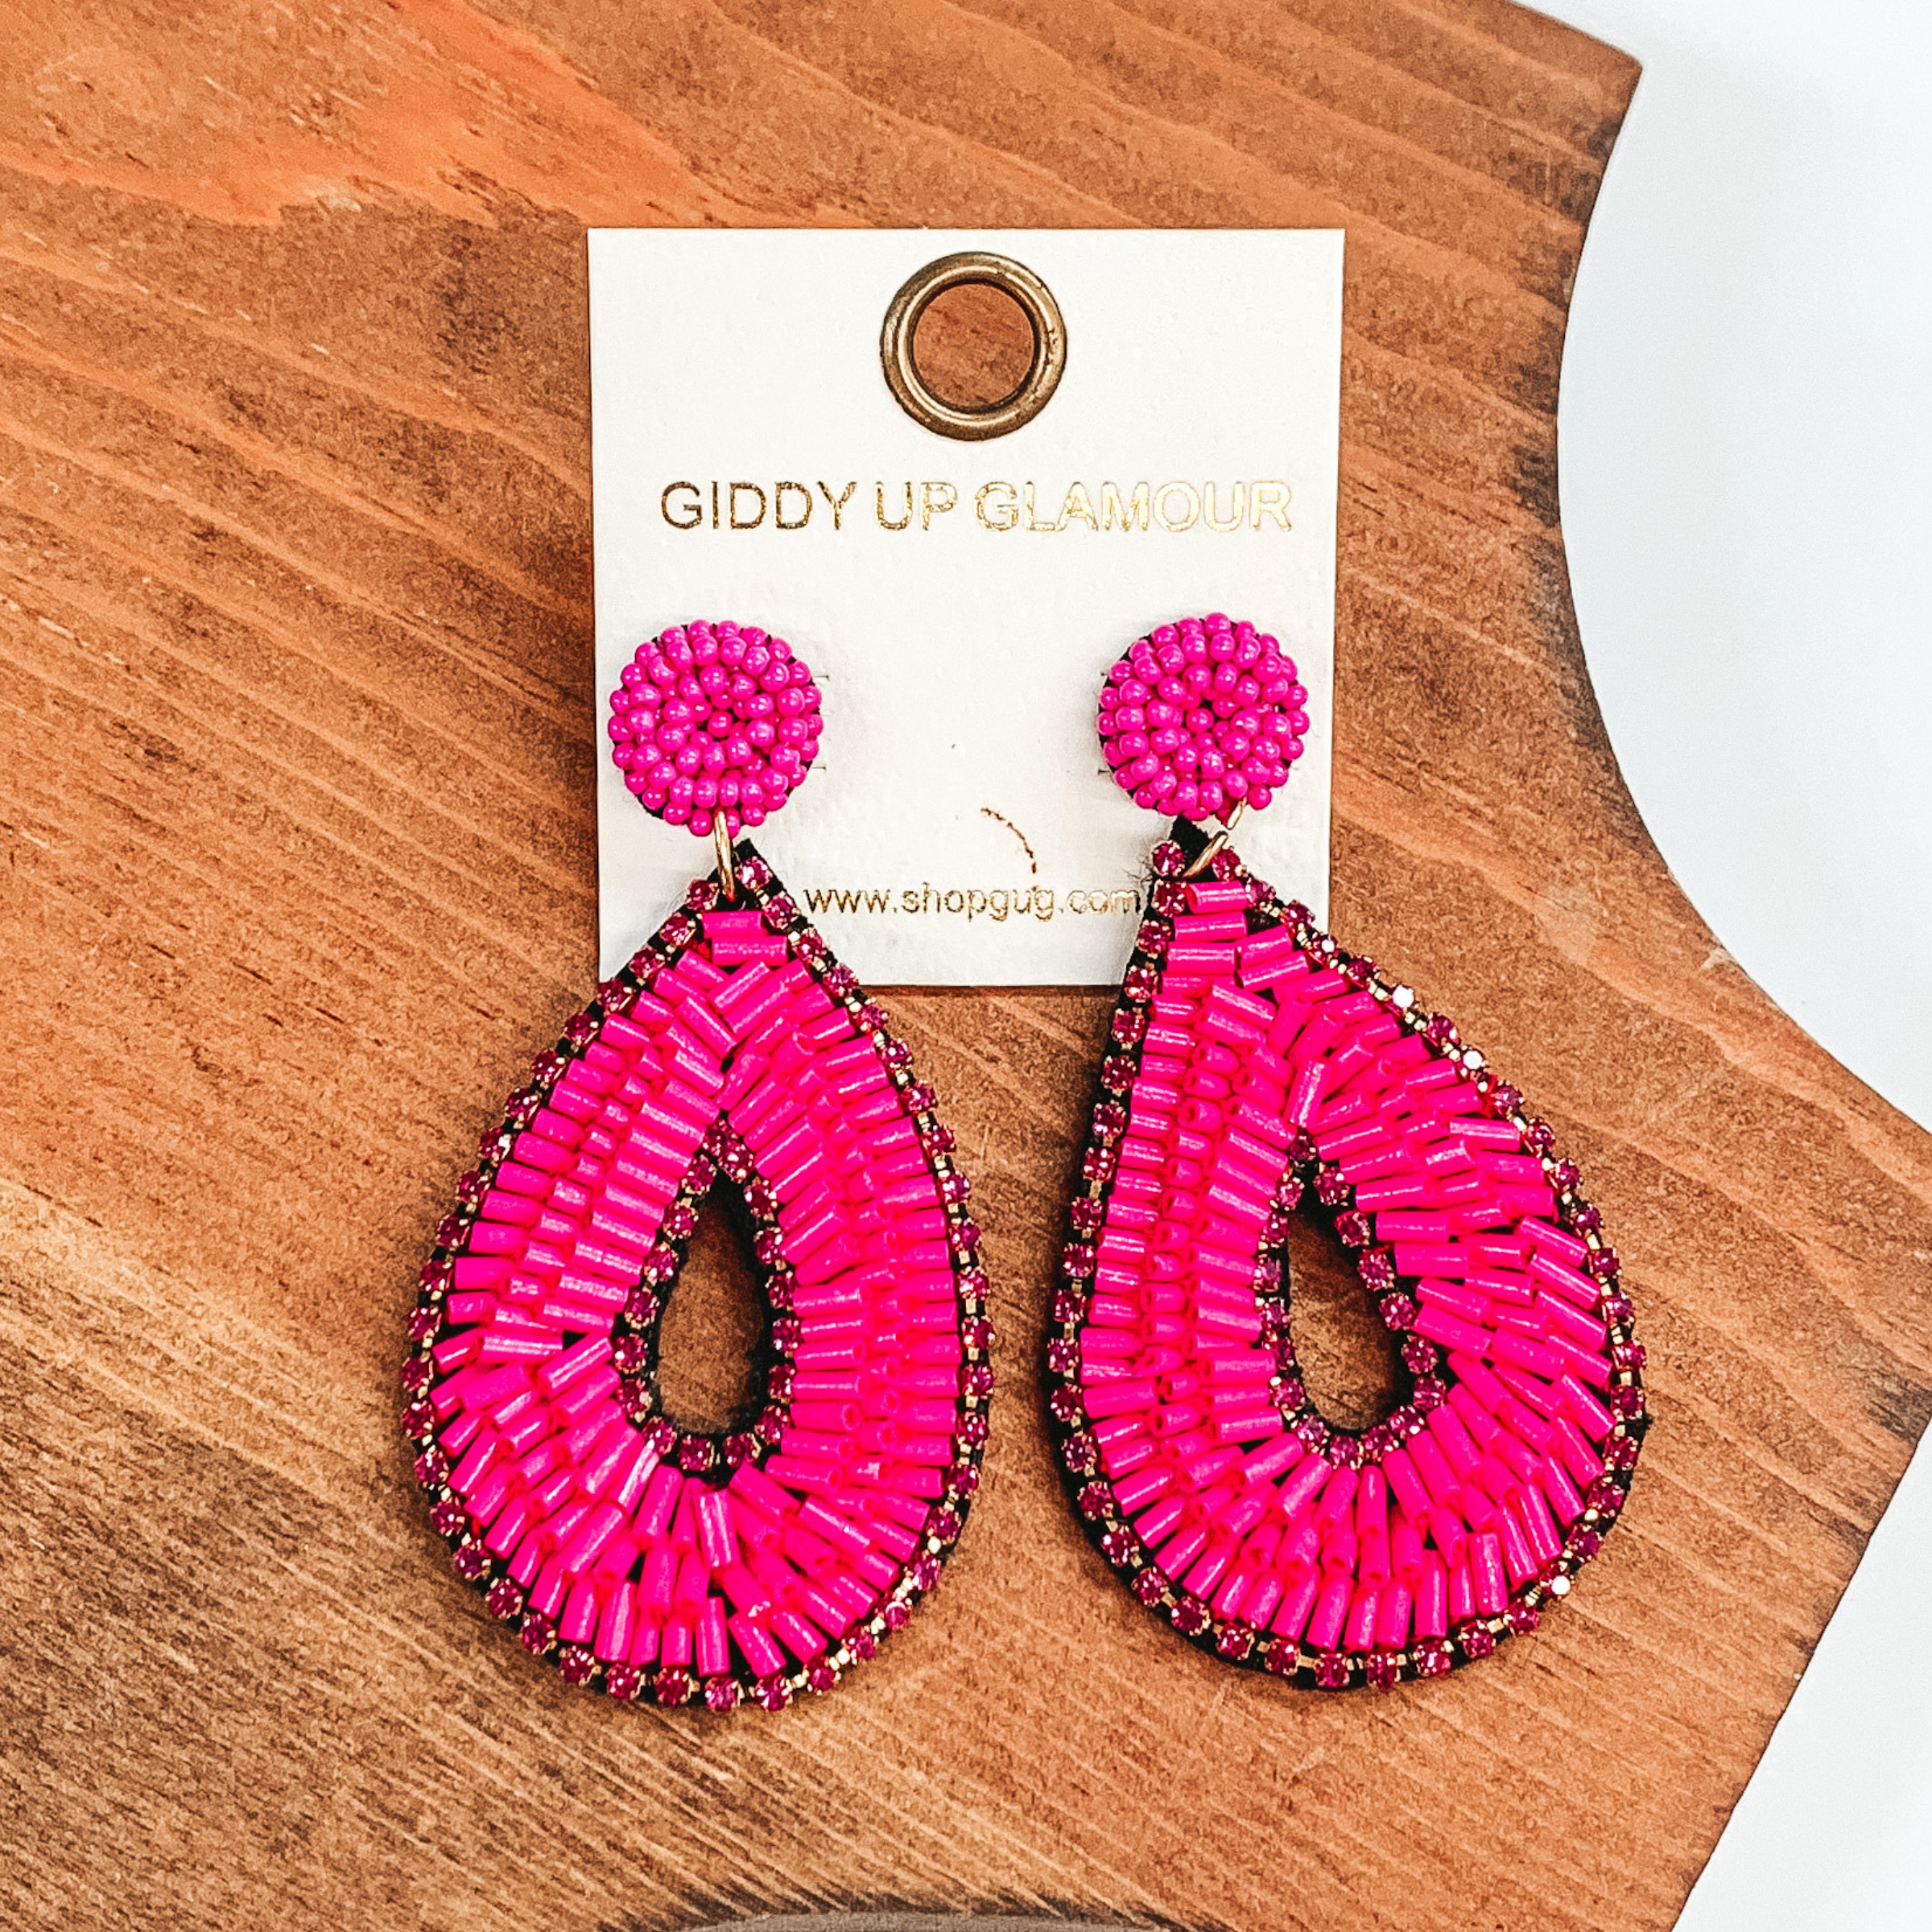 Pink bugle beaded earrings in teardrop shape. Outlined with pink crystals and in the middle, with pink bugle beads in between. These earrings  are pictured on a brown block and a white background.